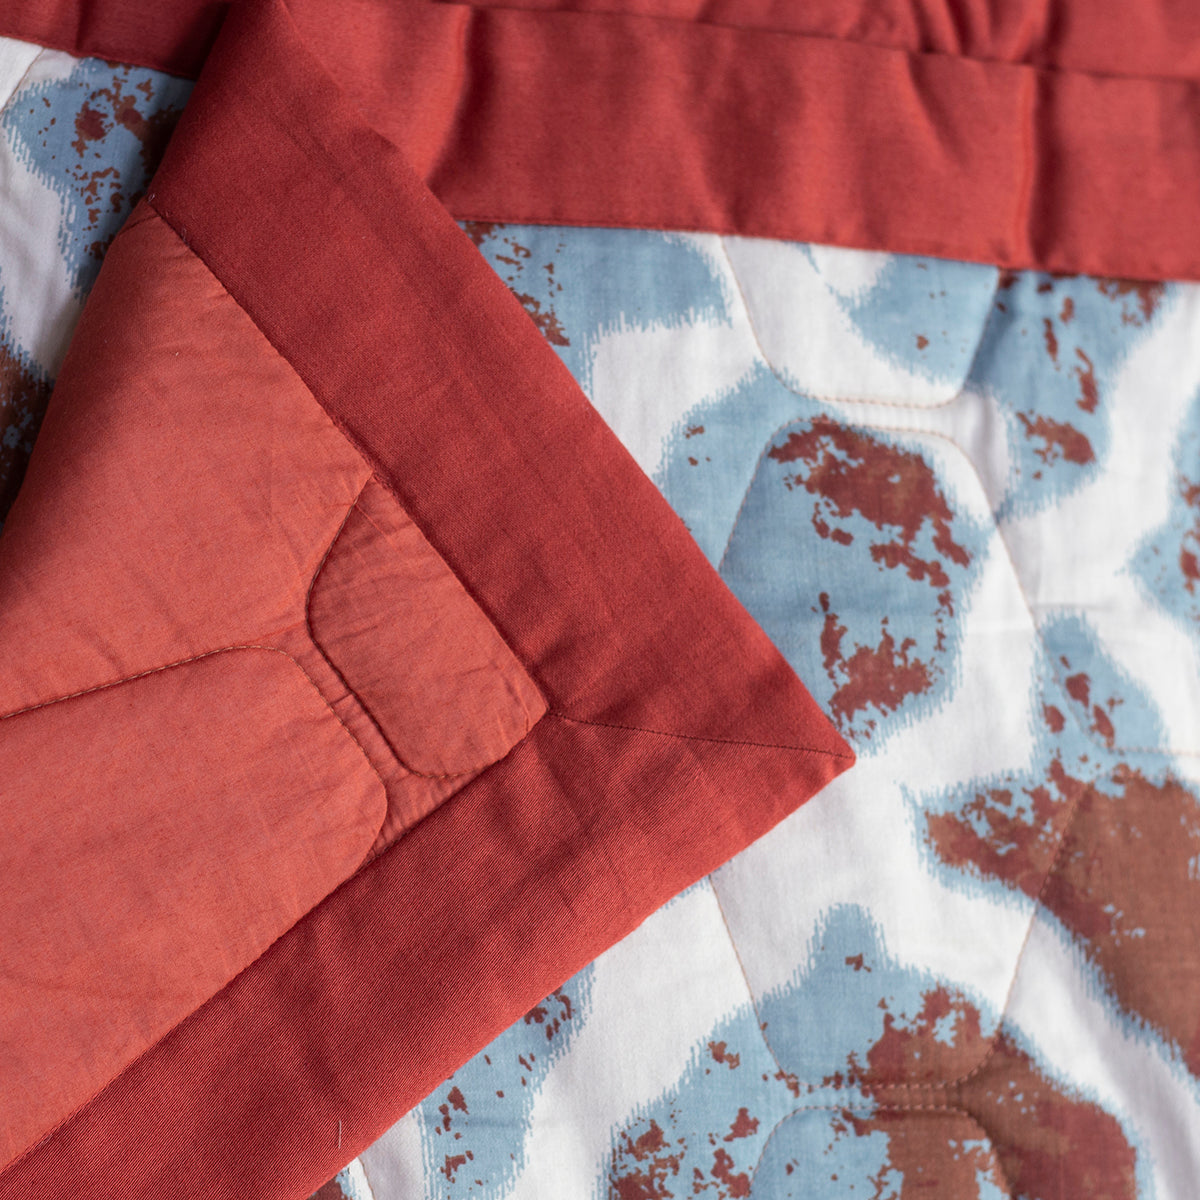 Nouveau Tradition Form Replay Red Quilt